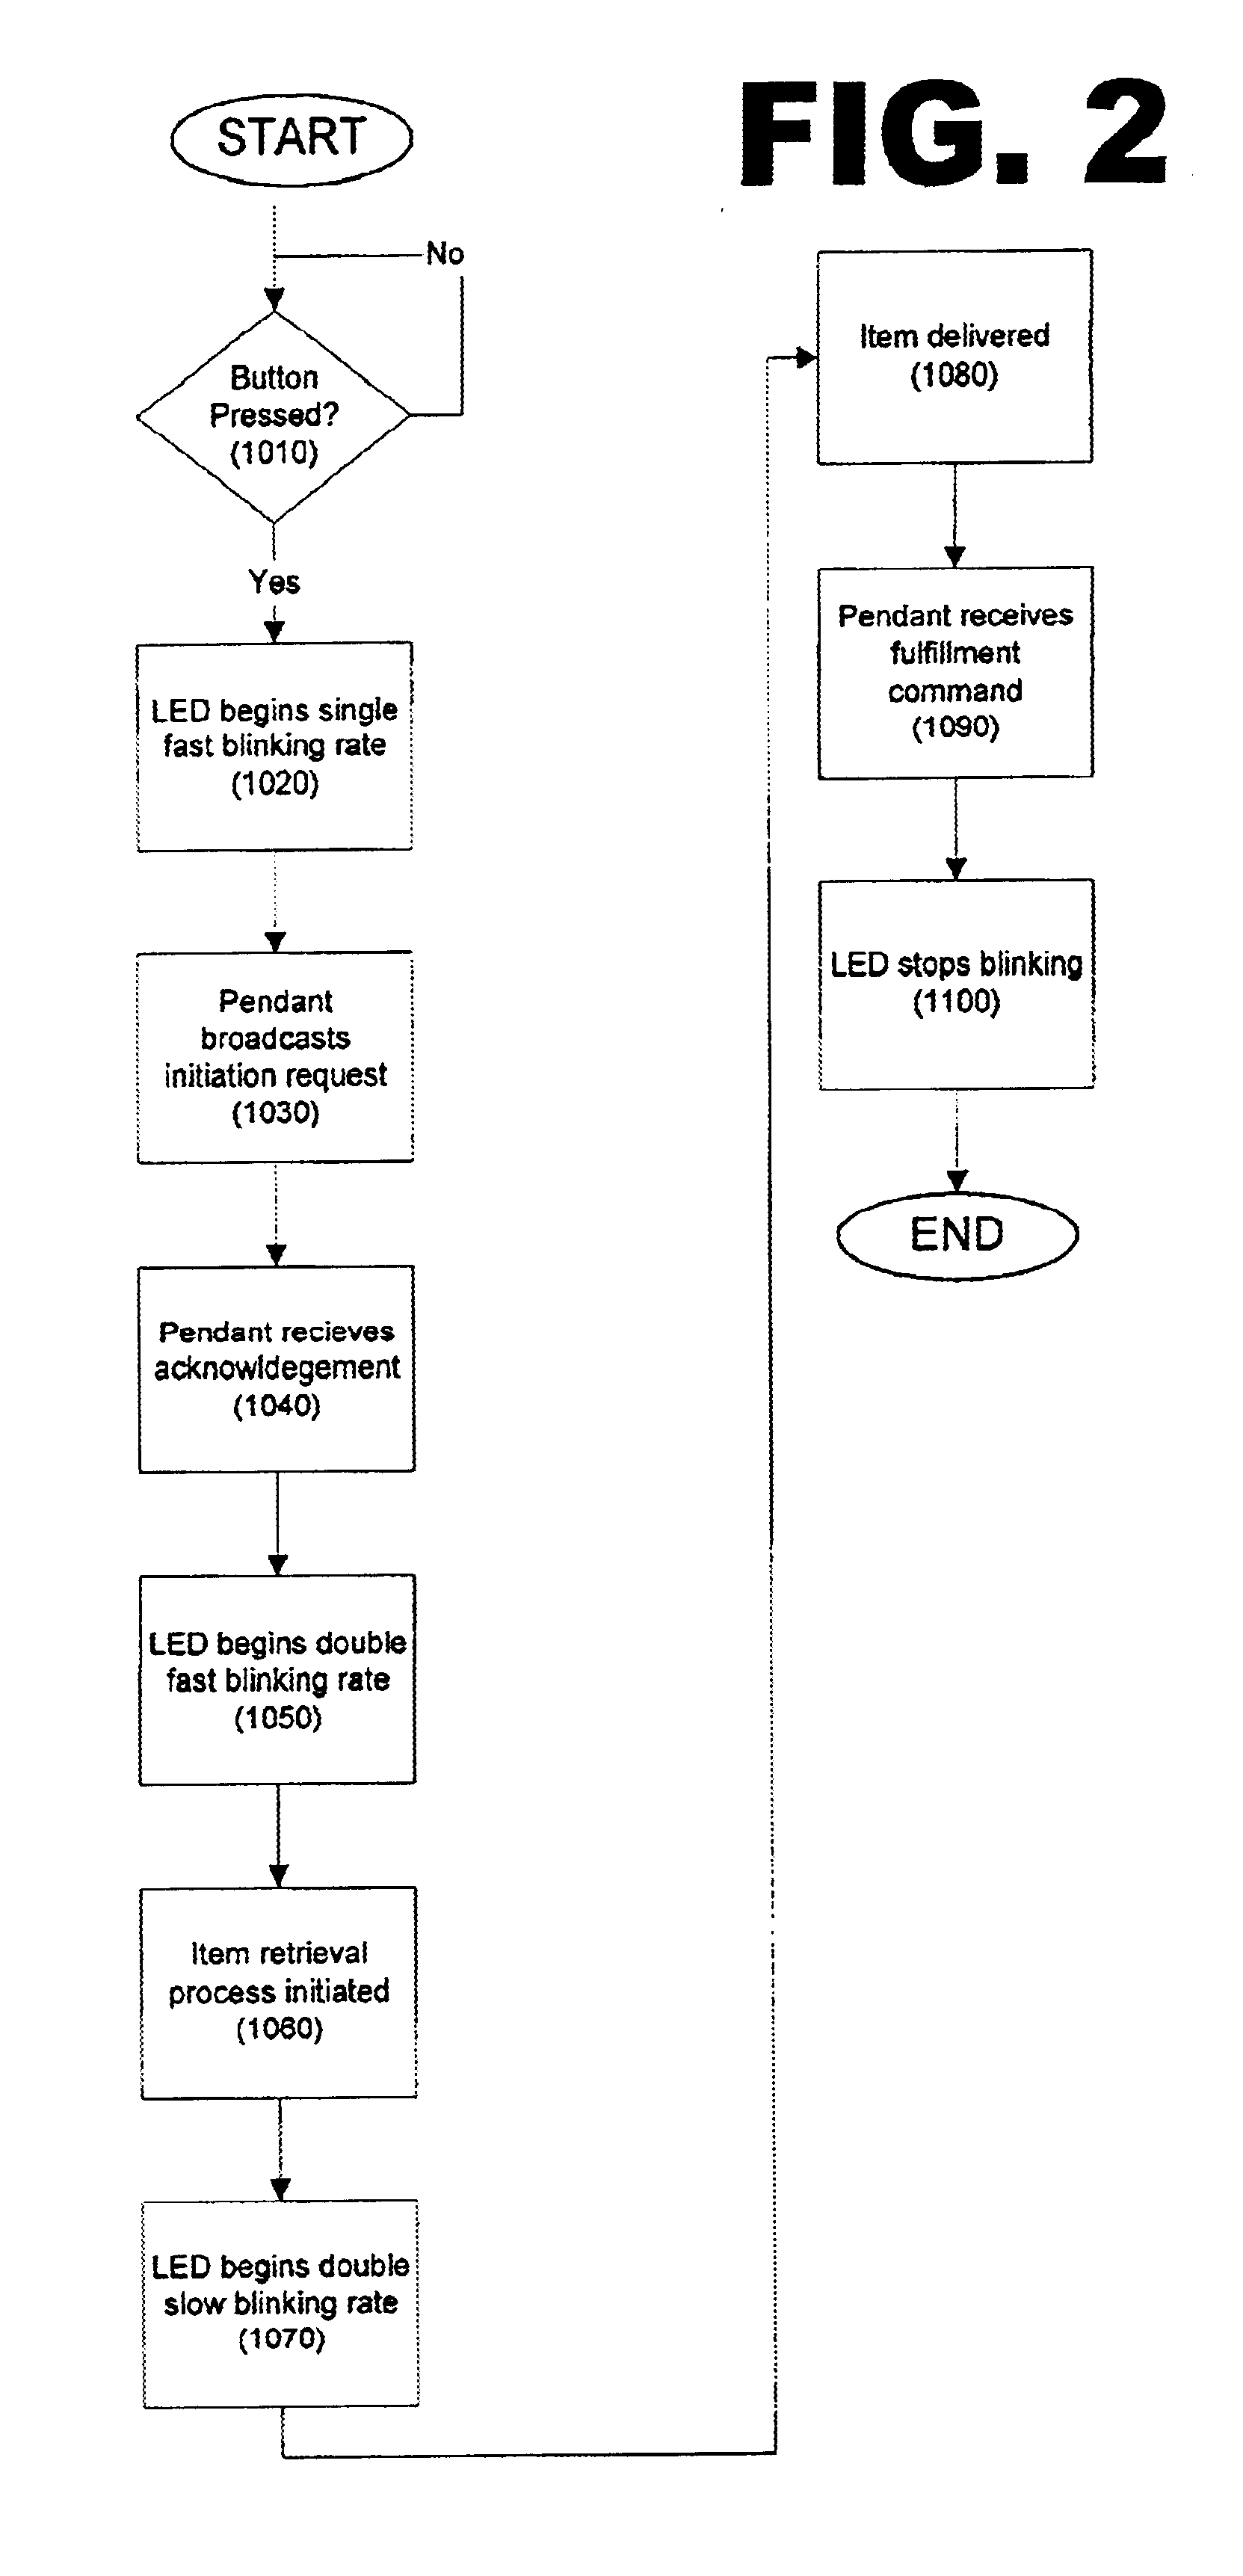 Apparatus for manufacturing management using a wireless device